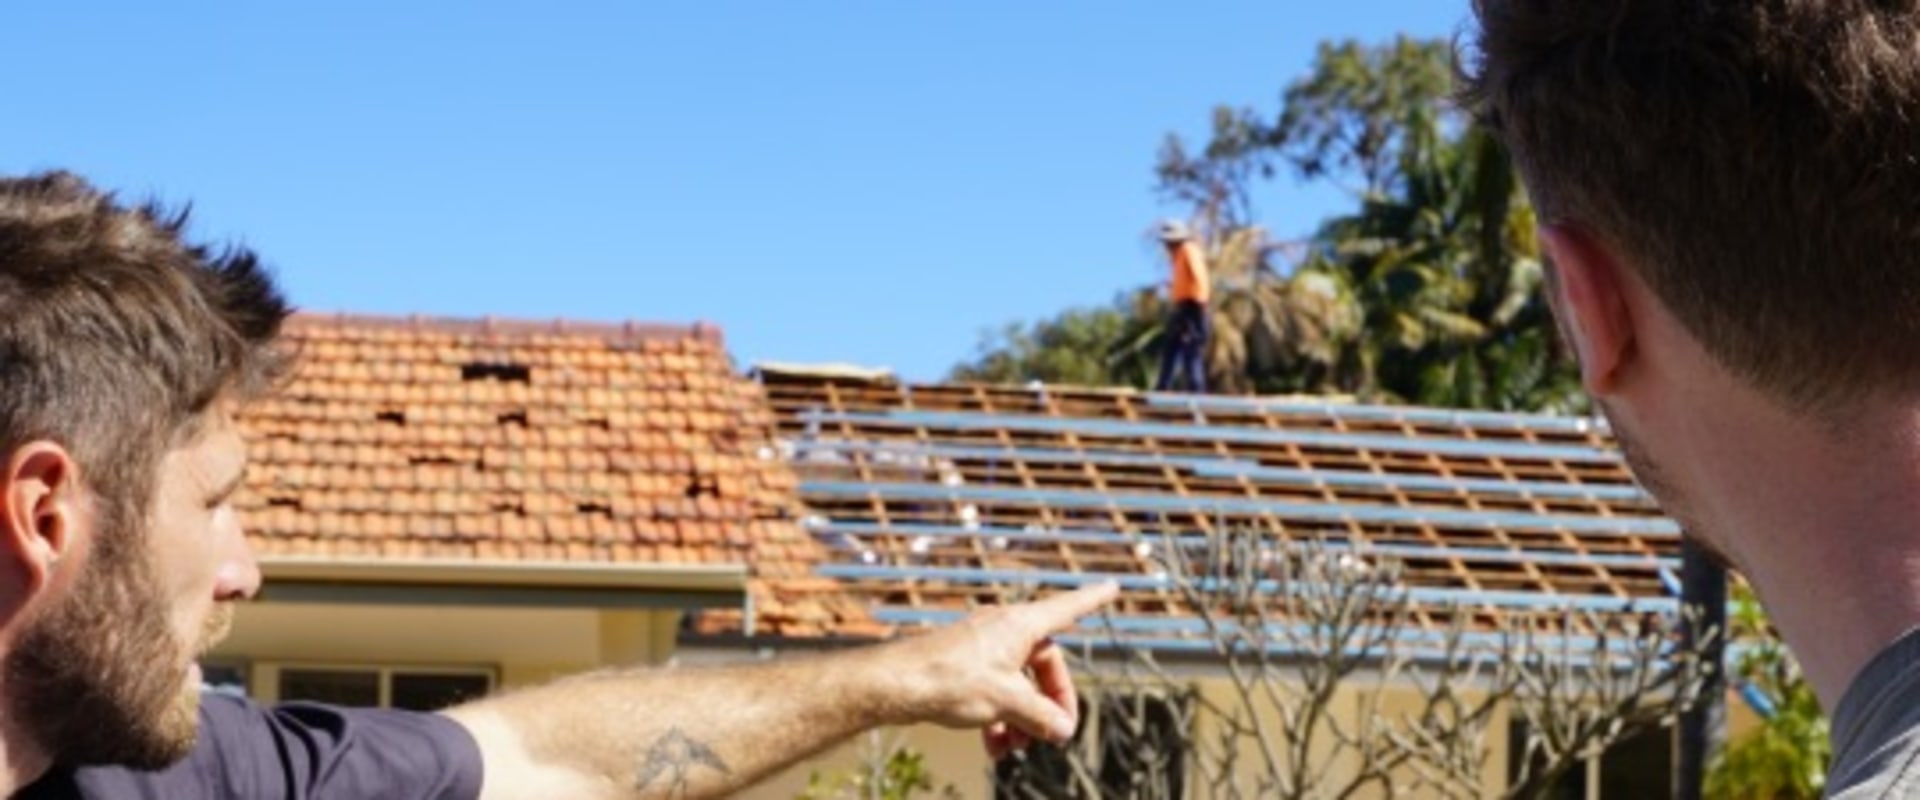 Obtaining Necessary Permits and Insurance for Your Roofing and Insulation Needs